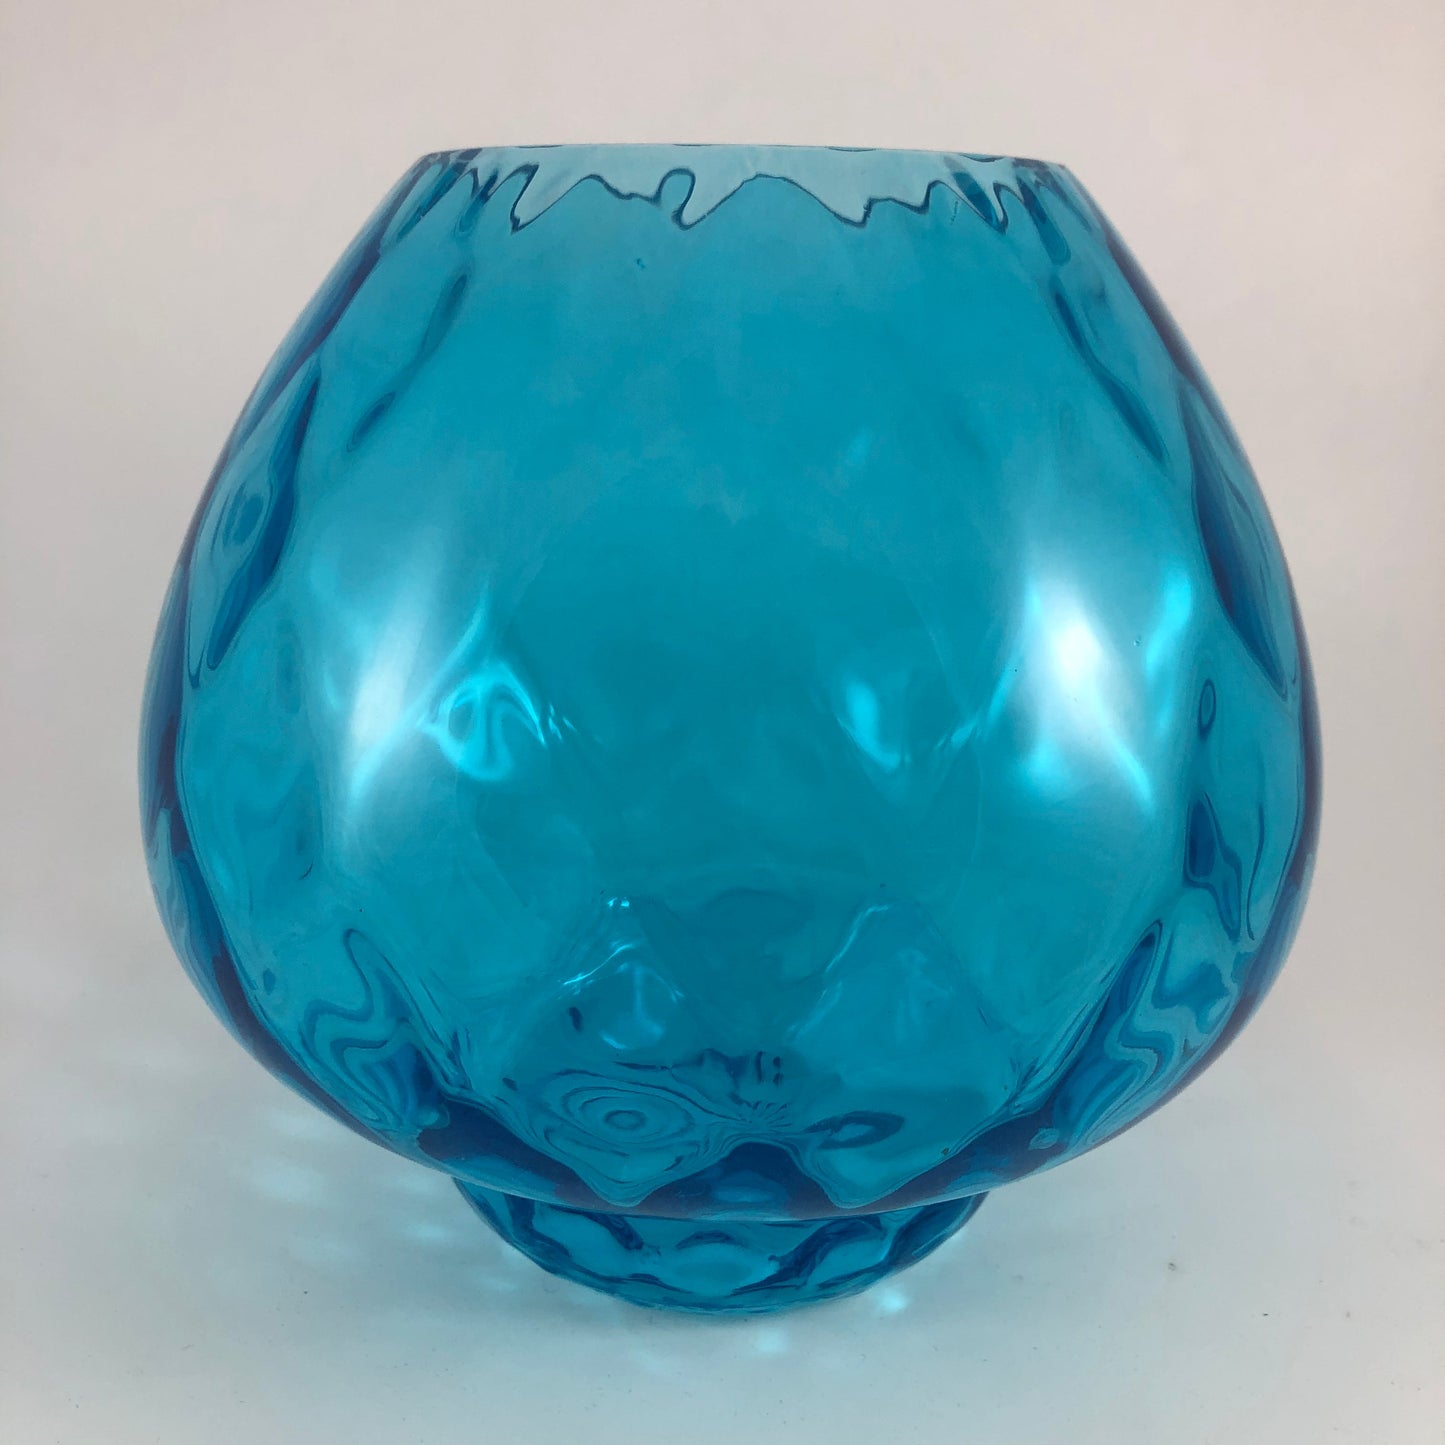 P9916 - Blue Lagoon candle holder